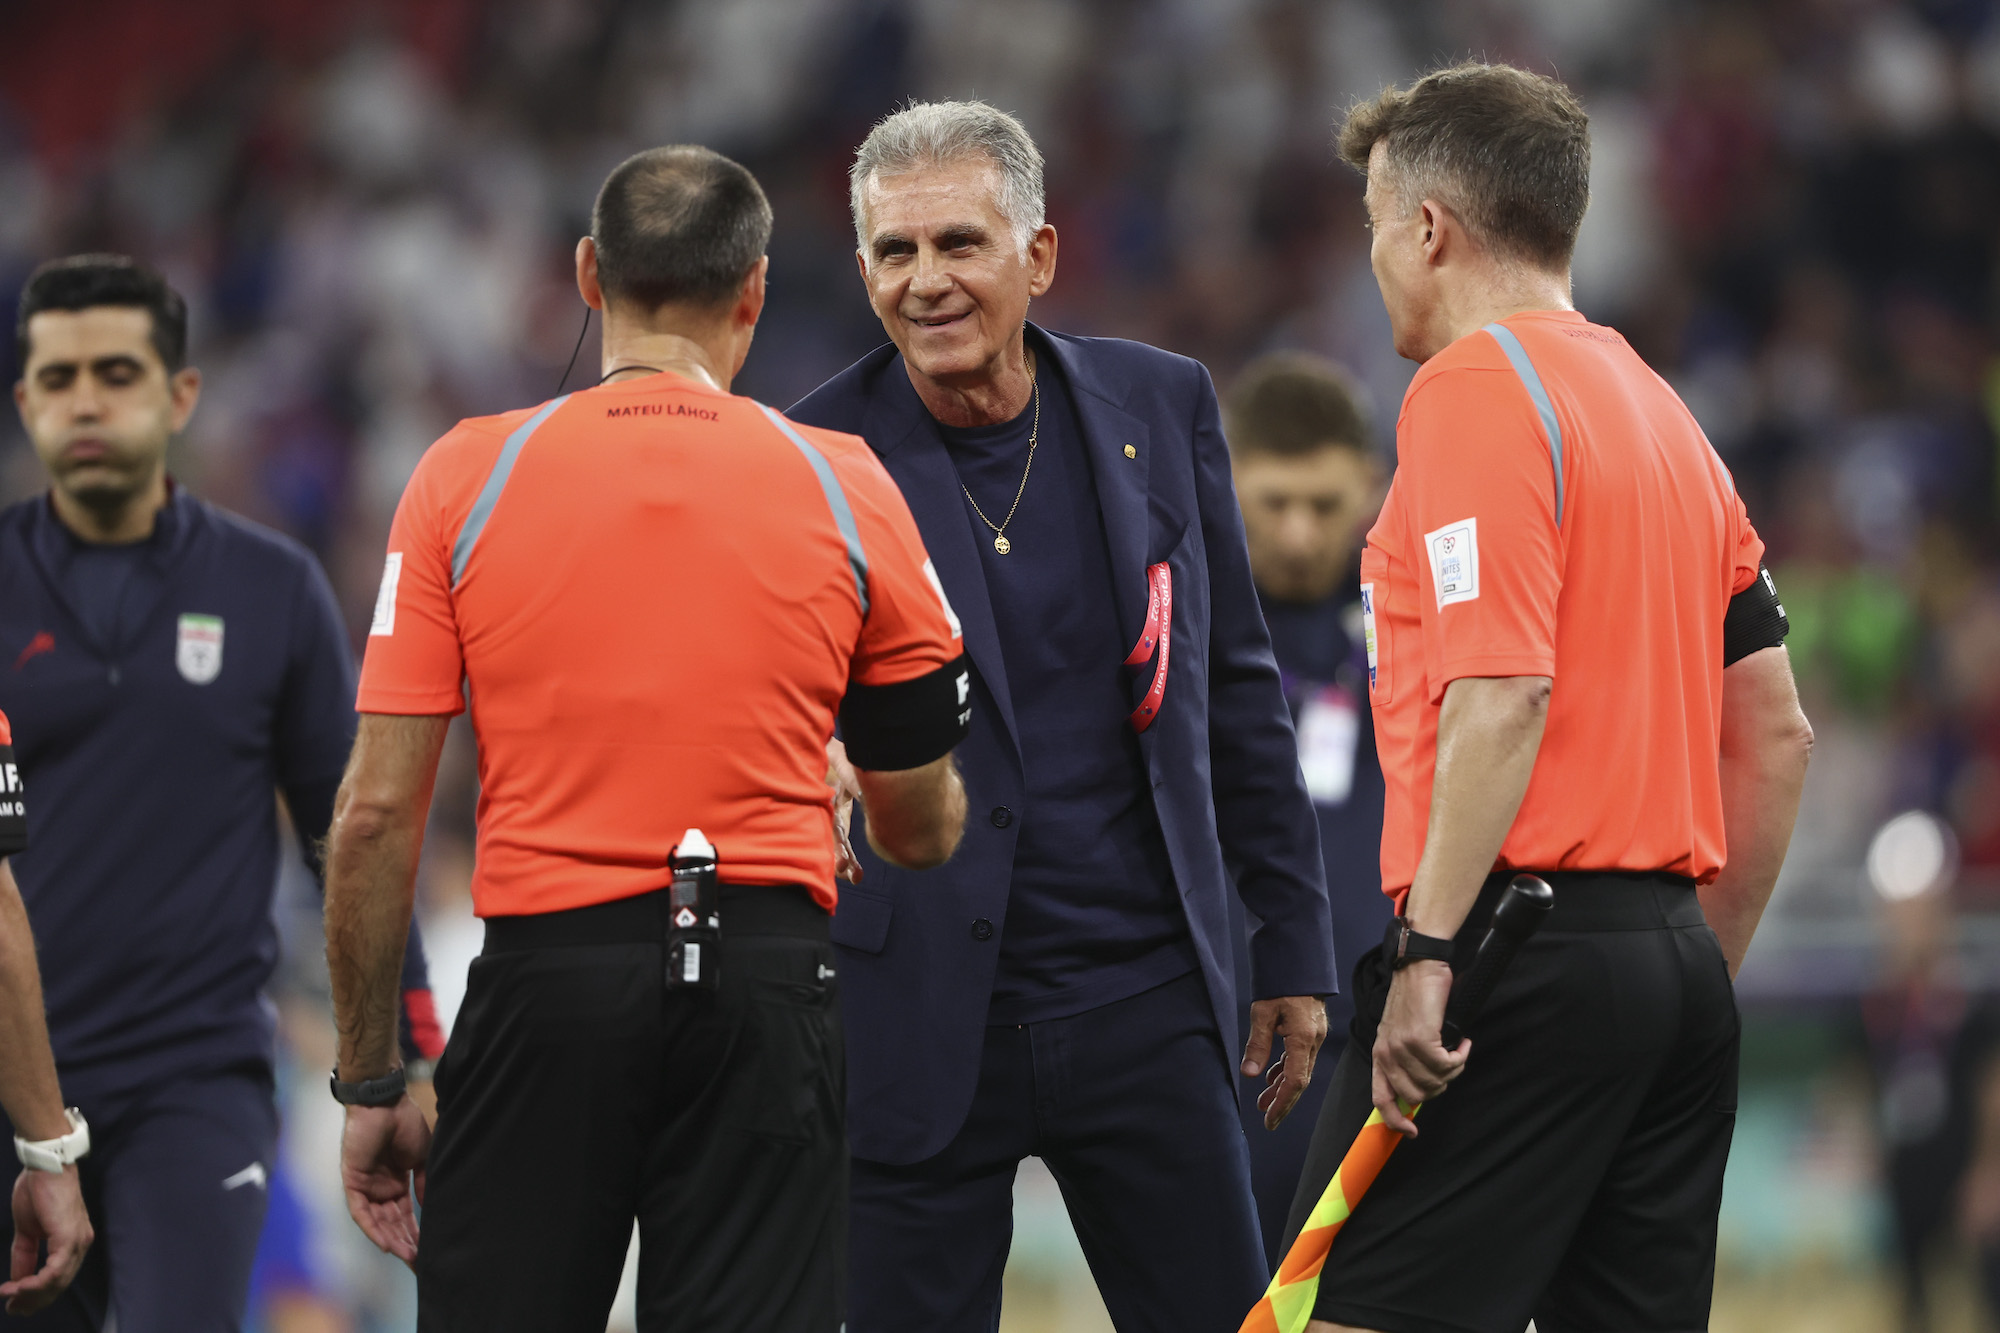 Iran coach Carlos Queiroz speaks to referees at full time after a 1-0 loss to USA at Al Thumama Stadium on Tuesday.